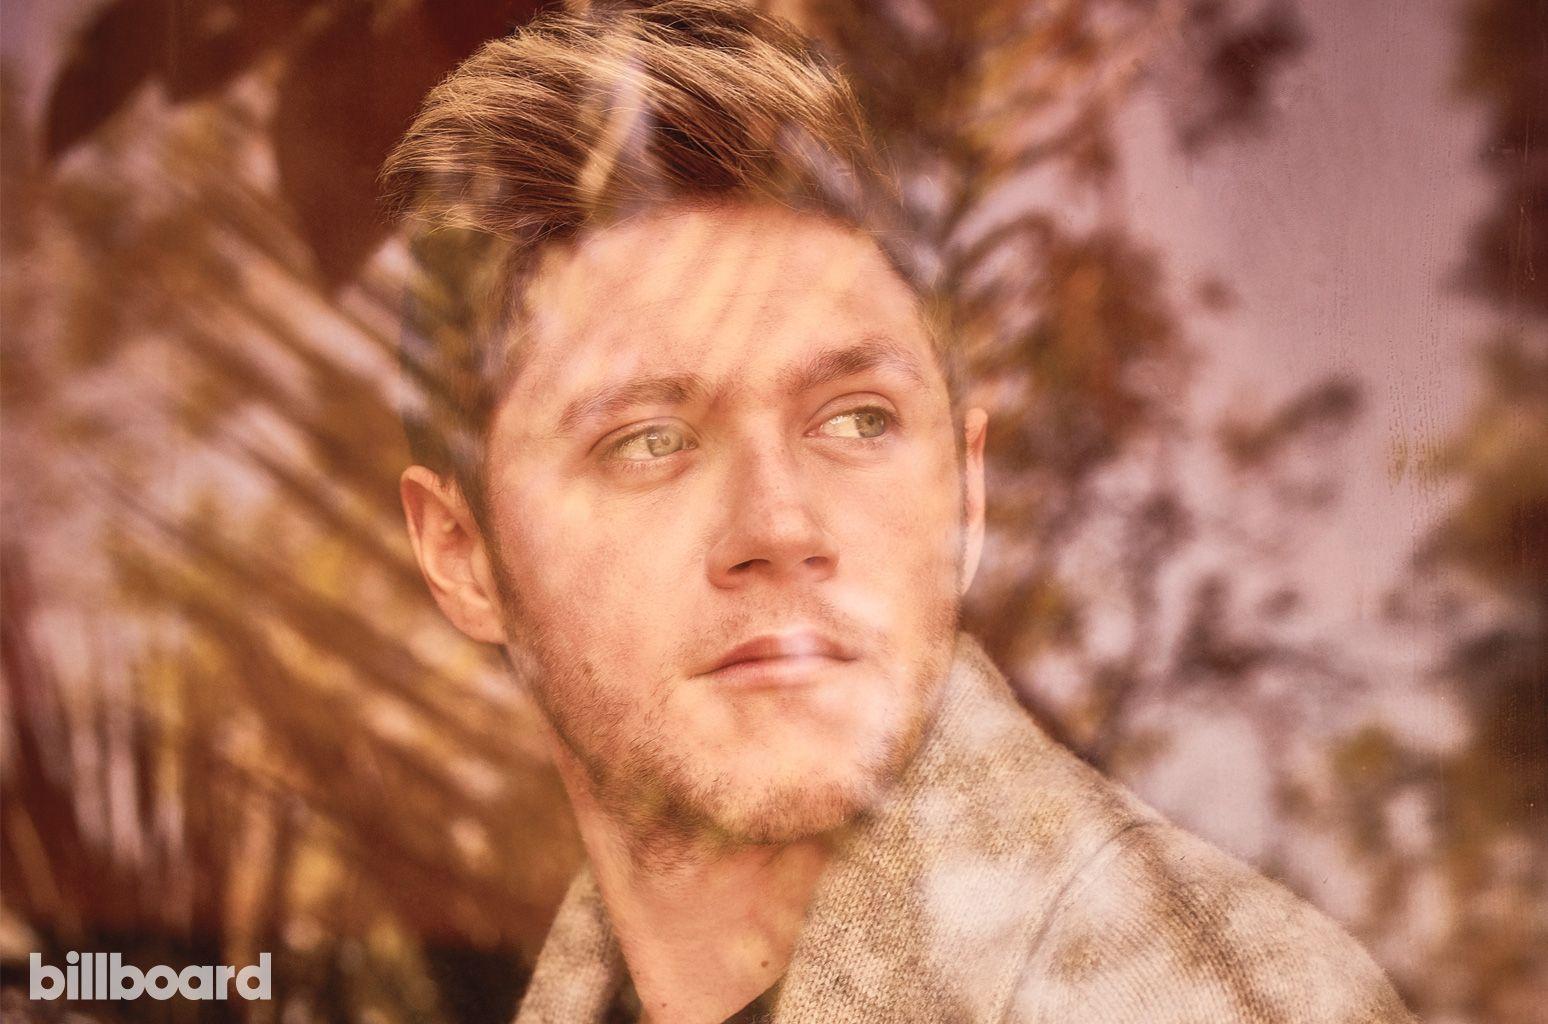 Niall Horan: Photo From Billboard Cover